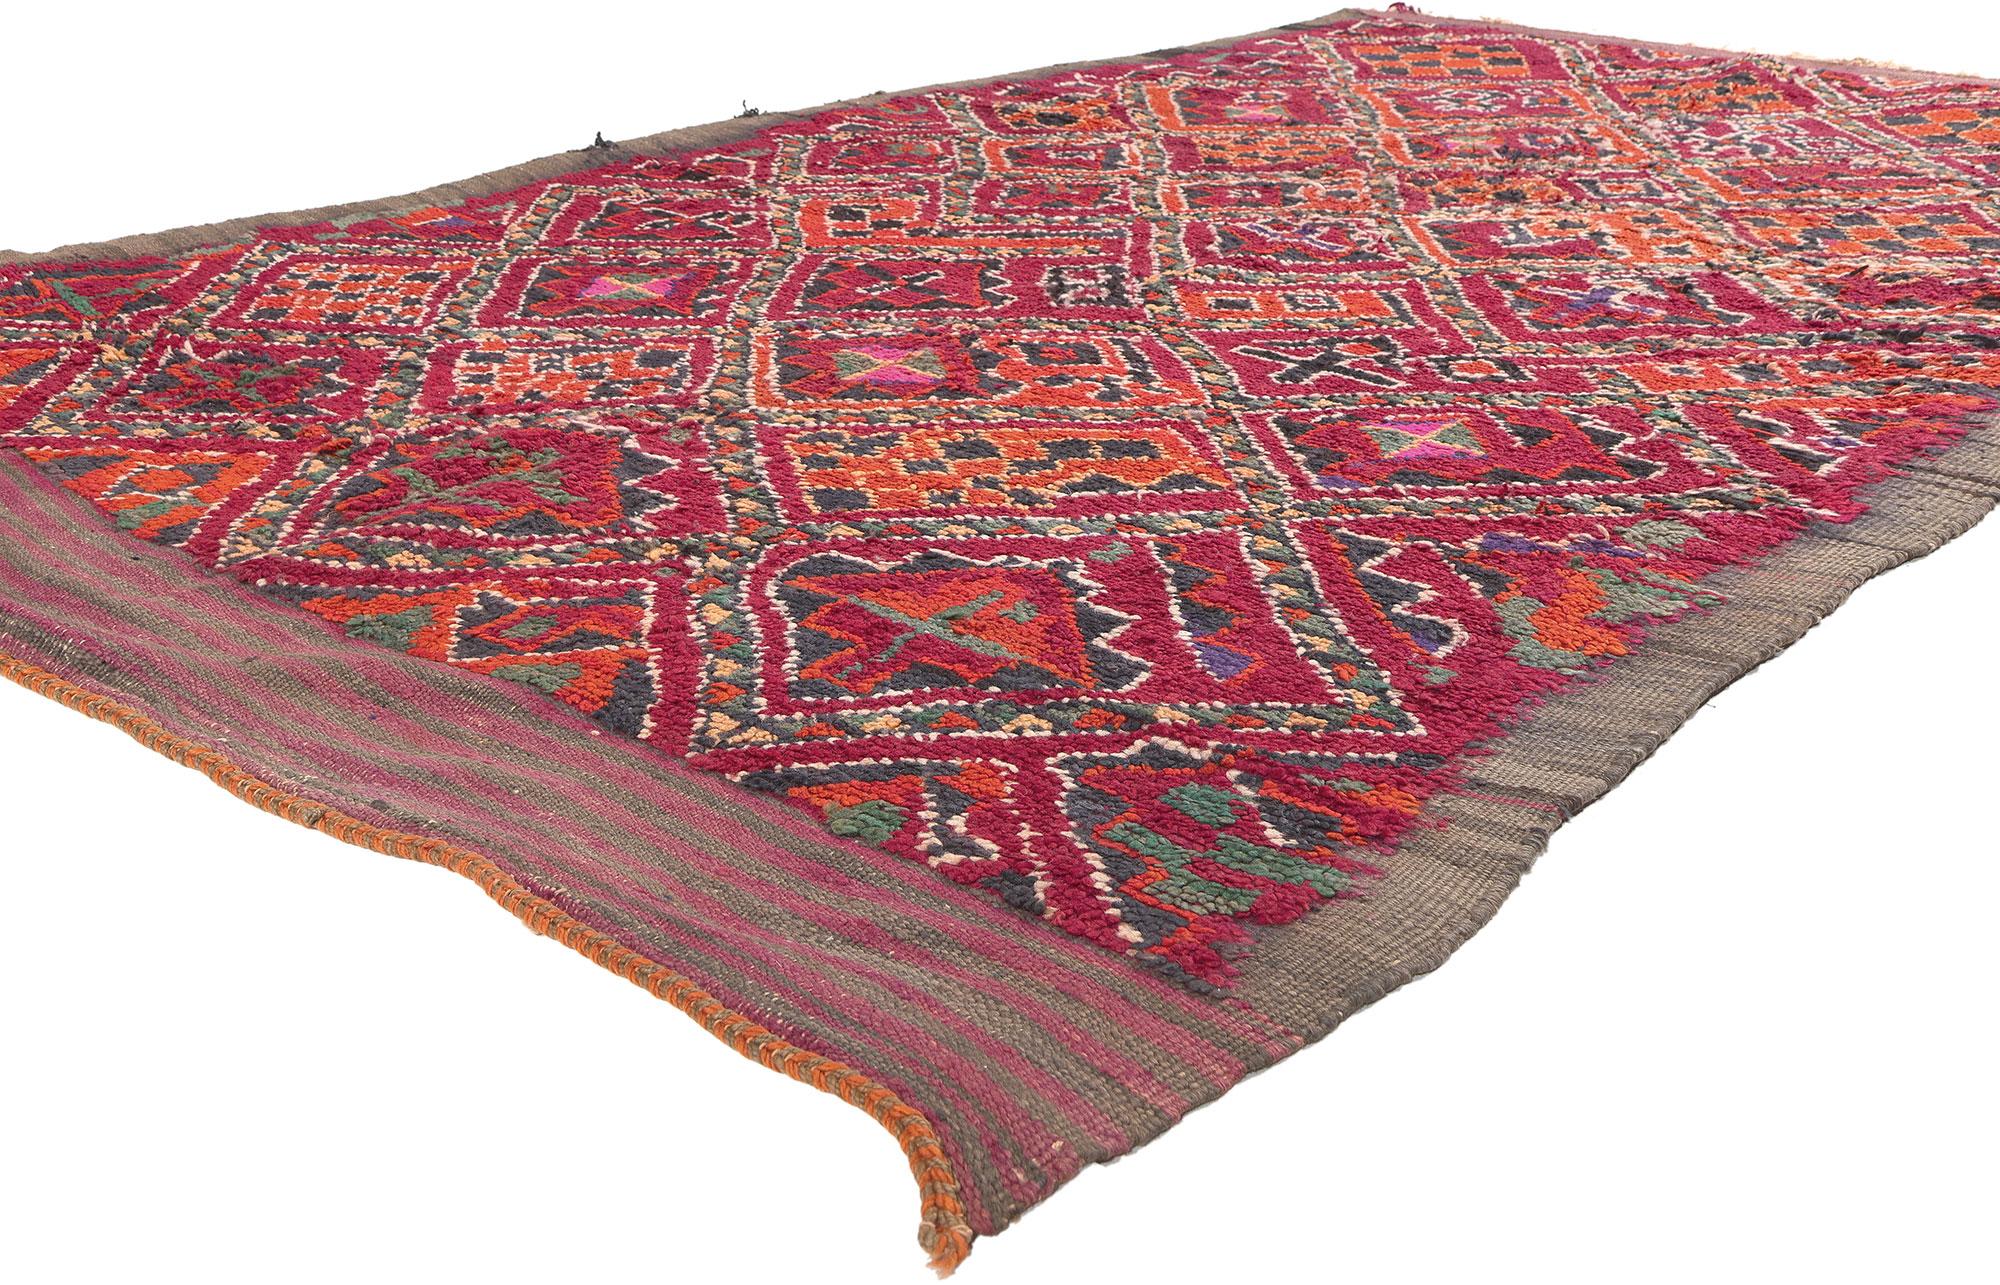 20991 Vintage Taznakht Moroccan Rug, 05'08 x 09'07. 
Embark on a journey into the rich legacy of the Taznakht Tribe, where skilled hands in the High Atlas Mountains of southern Morocco wove this hand-knotted wool vintage Berber Moroccan rug—an